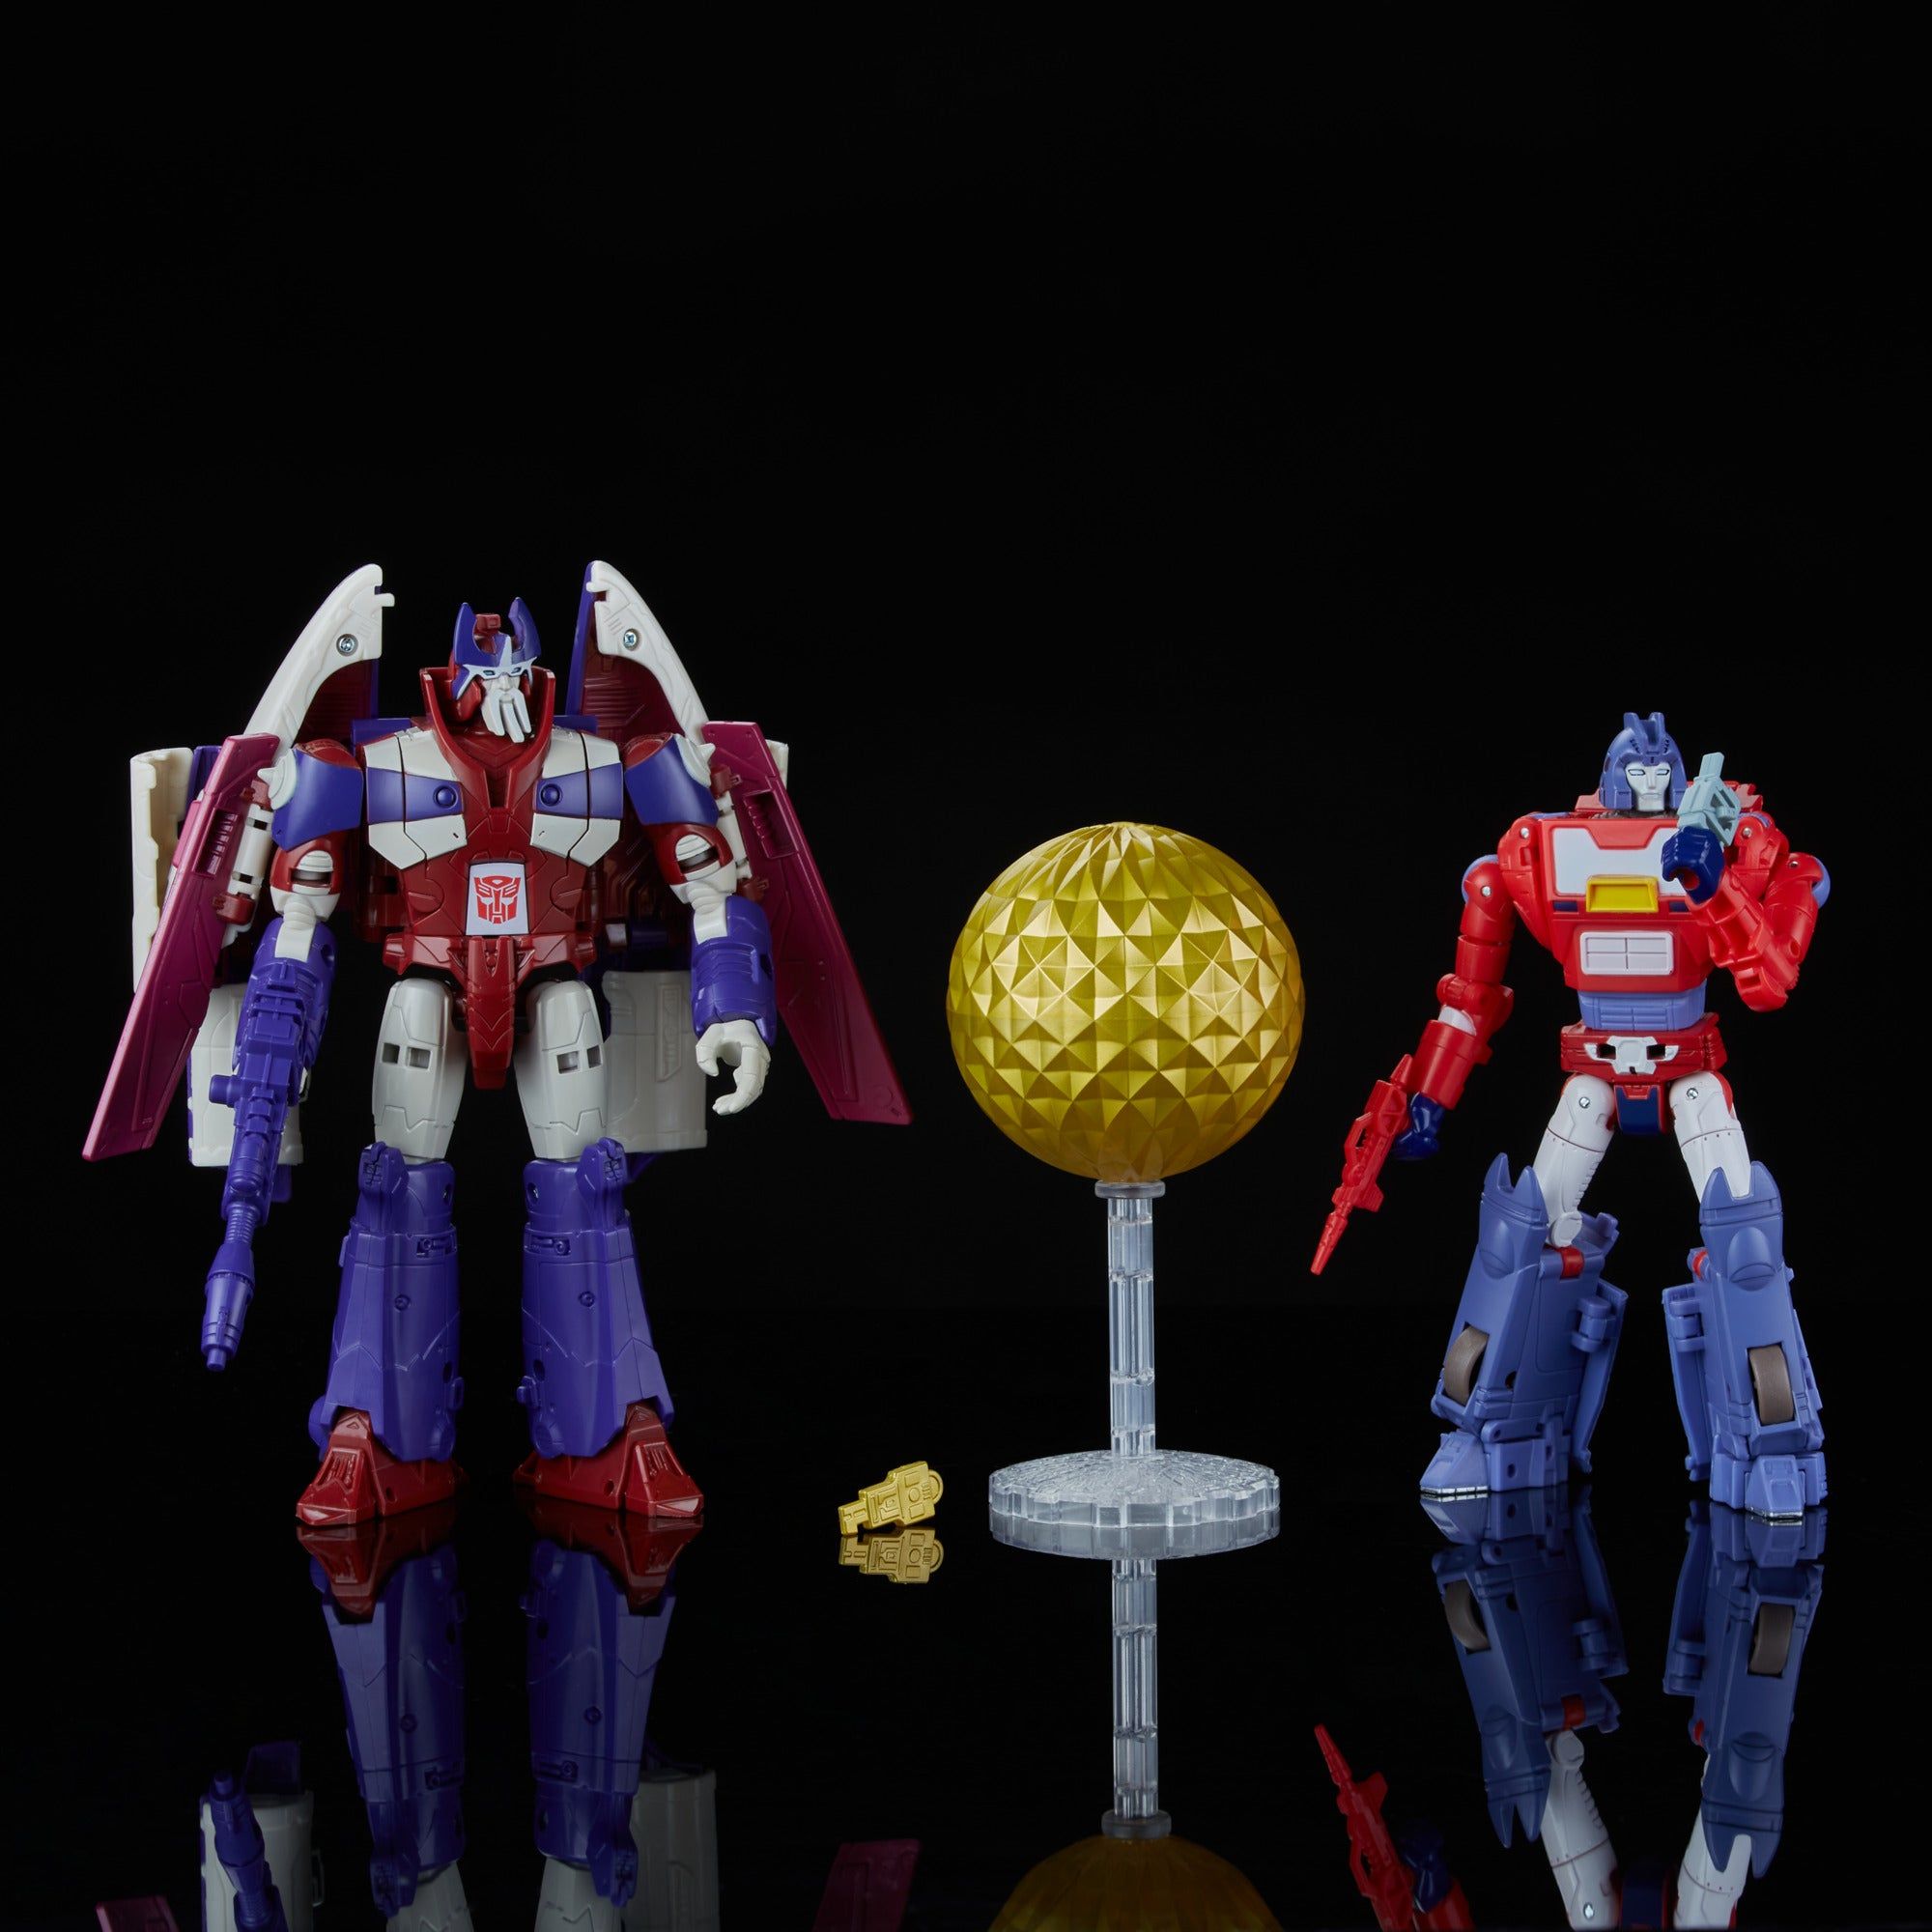 Alpha Trion and Orion Pax toys from Hasbro